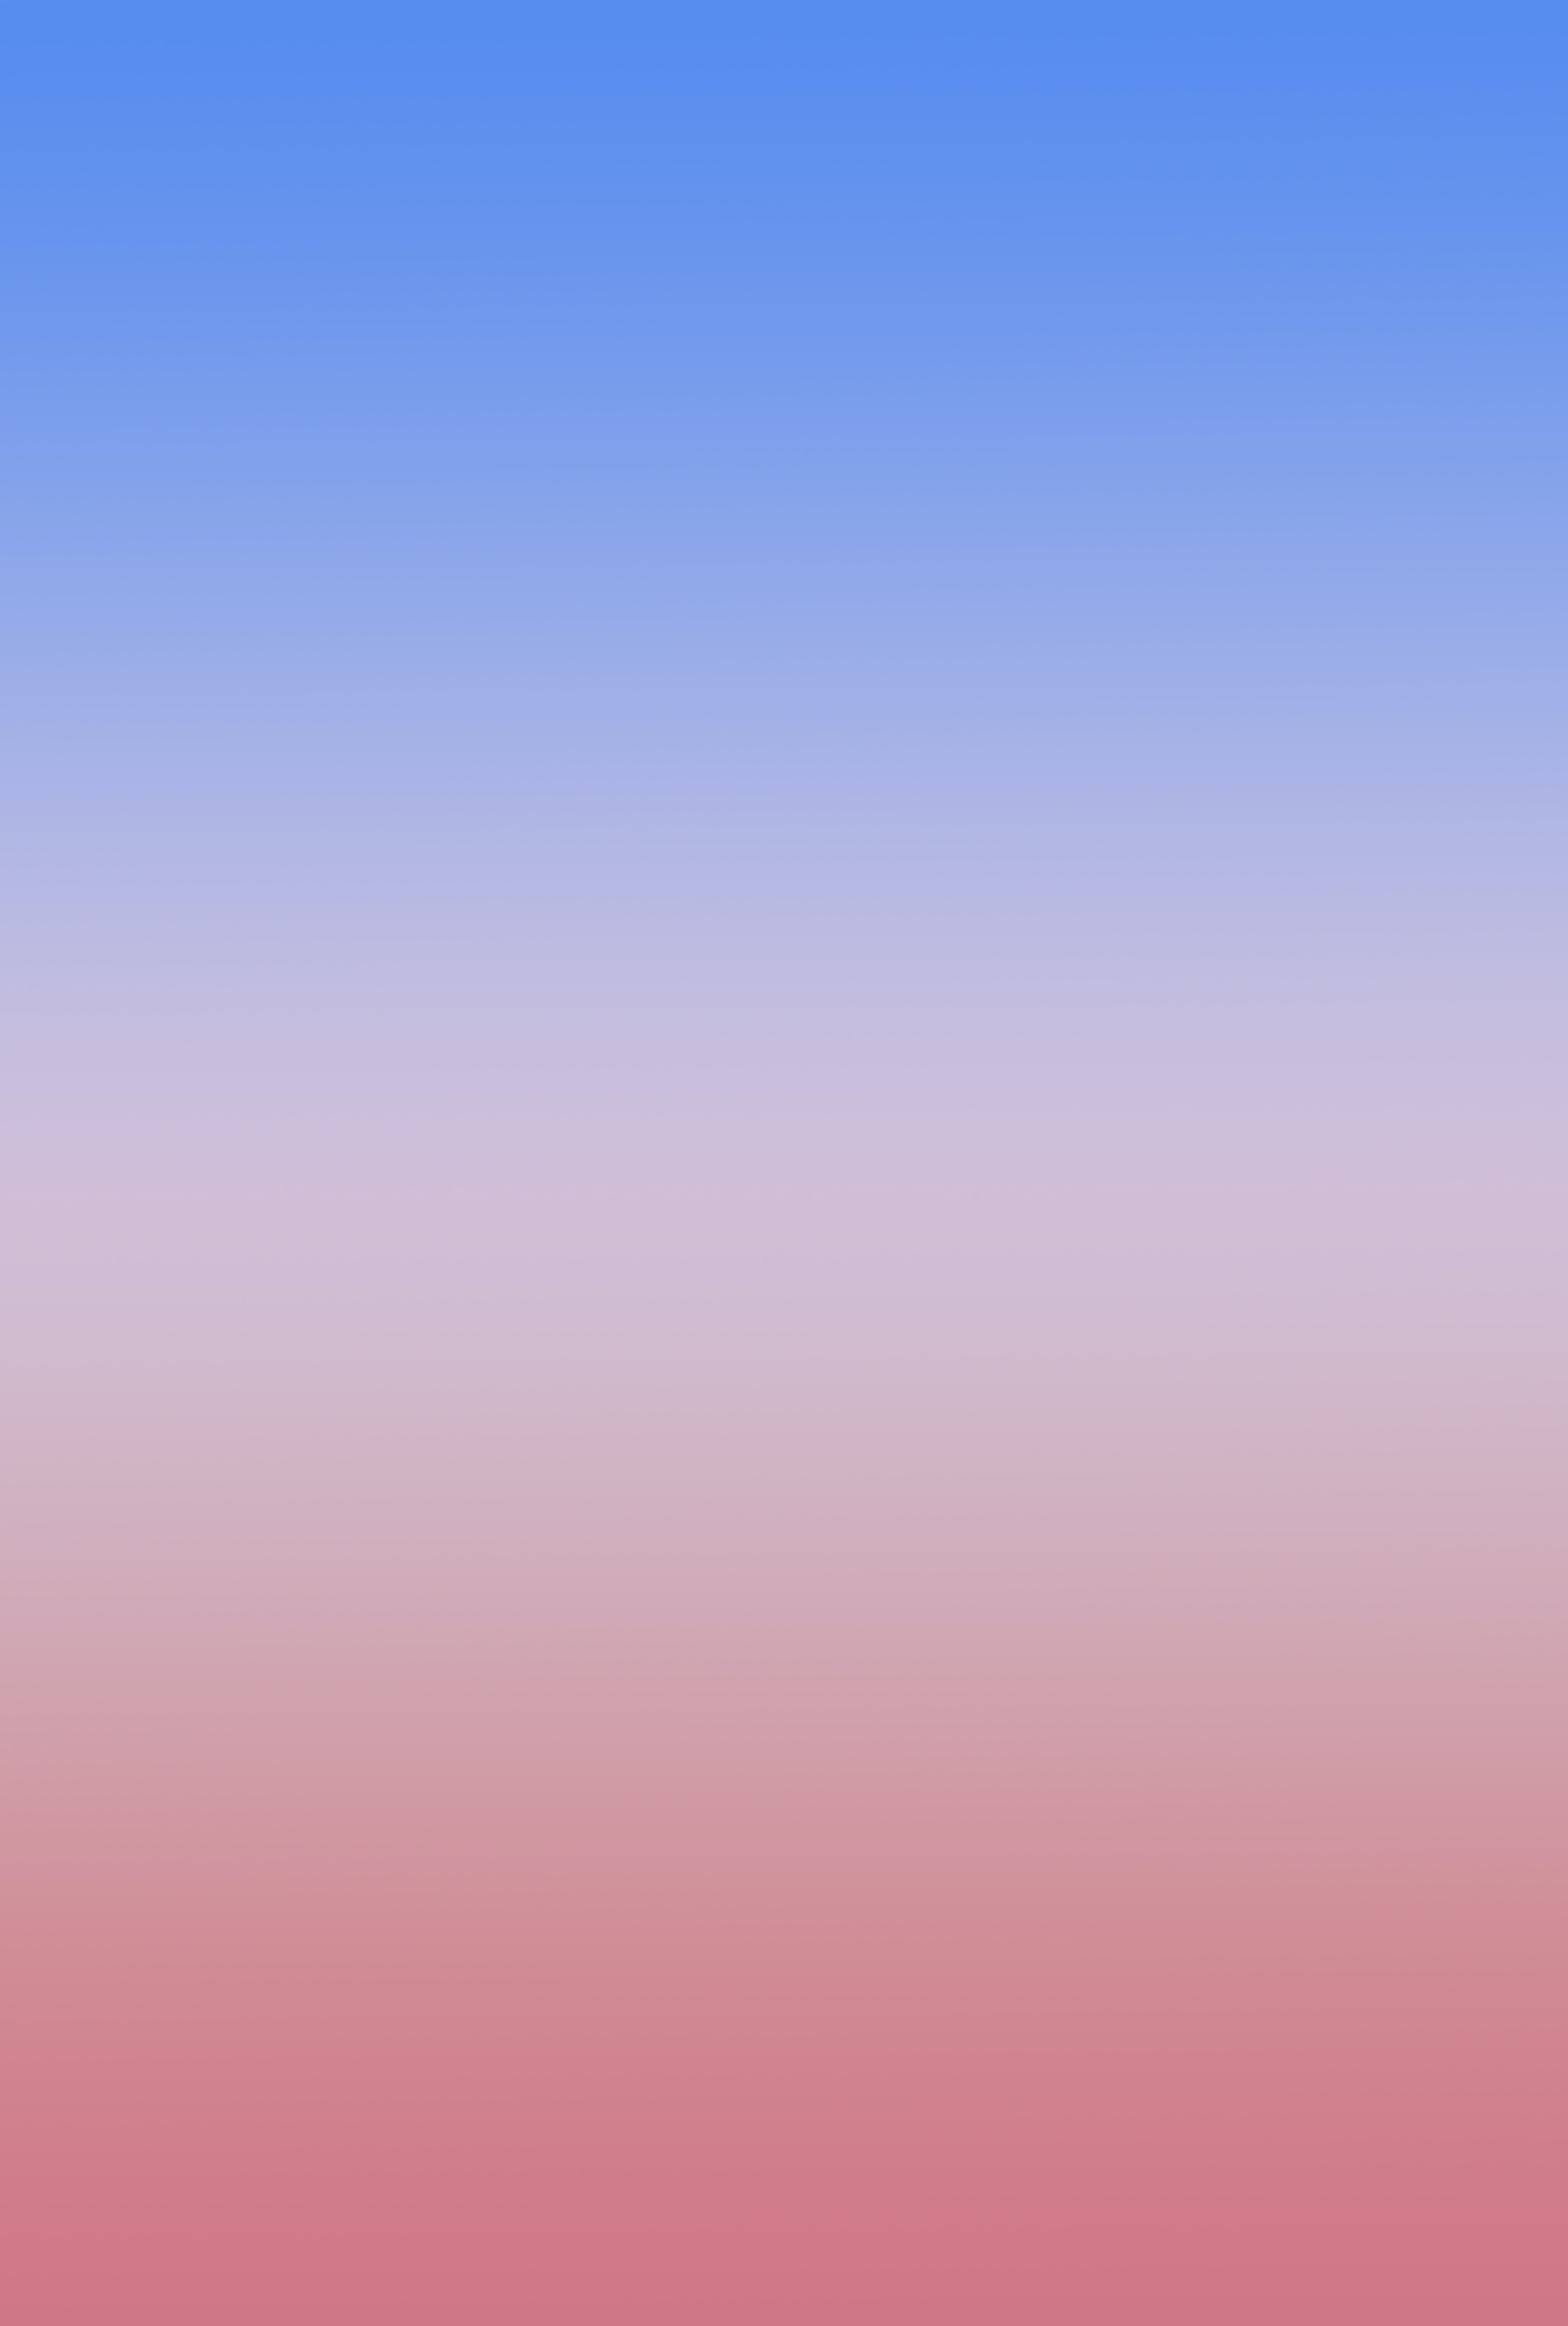 Mobile Wallpaper: Free HD Download [HQ] pink, sky, blue, abstract